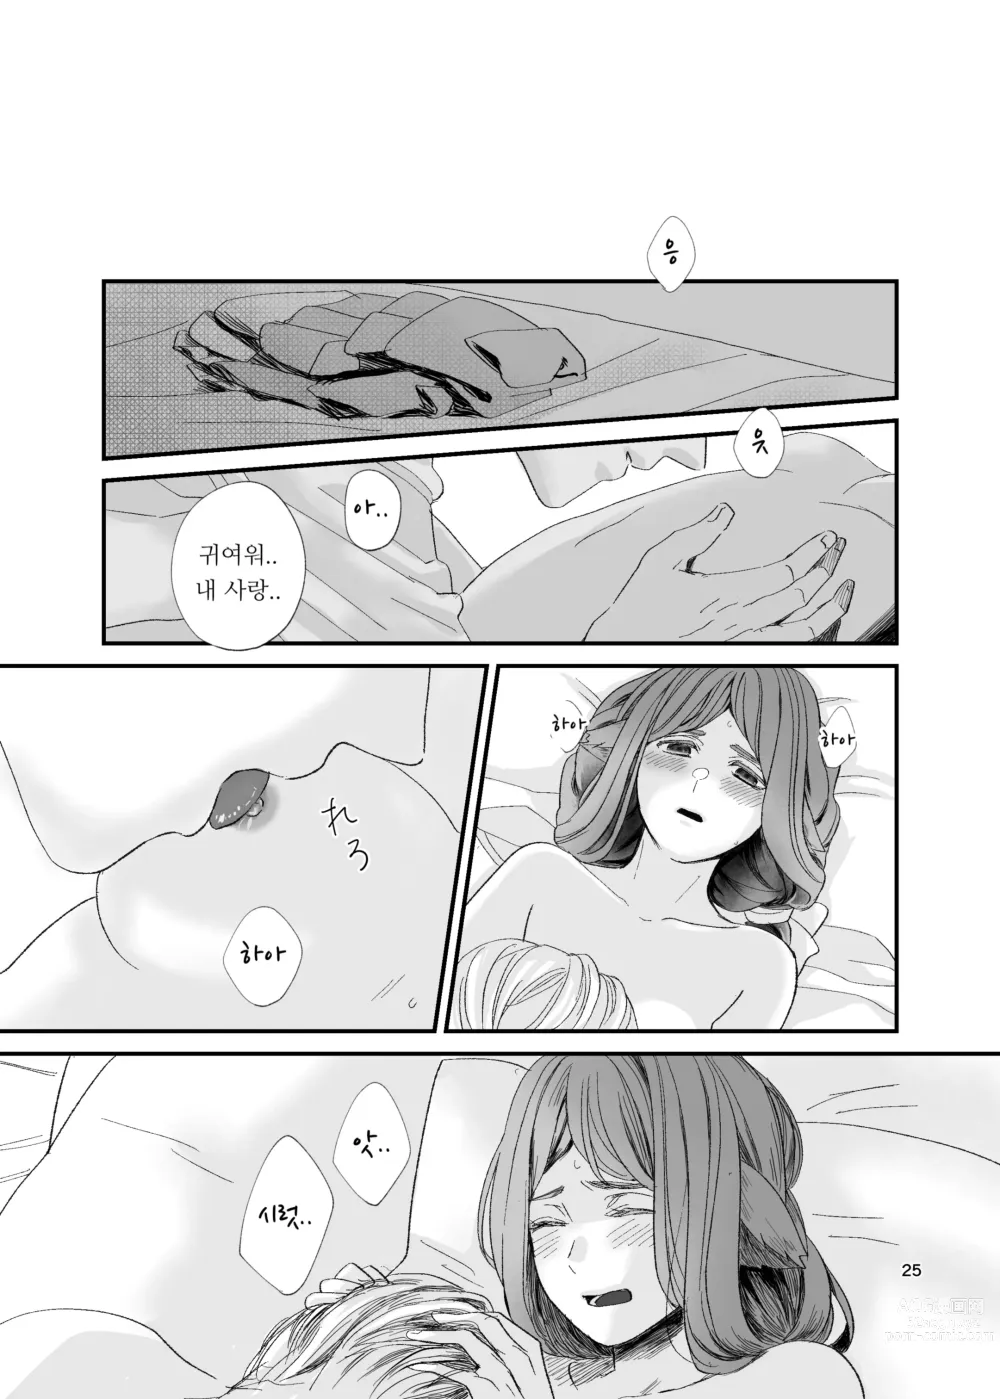 Page 25 of doujinshi 수인 영애와 혼약자